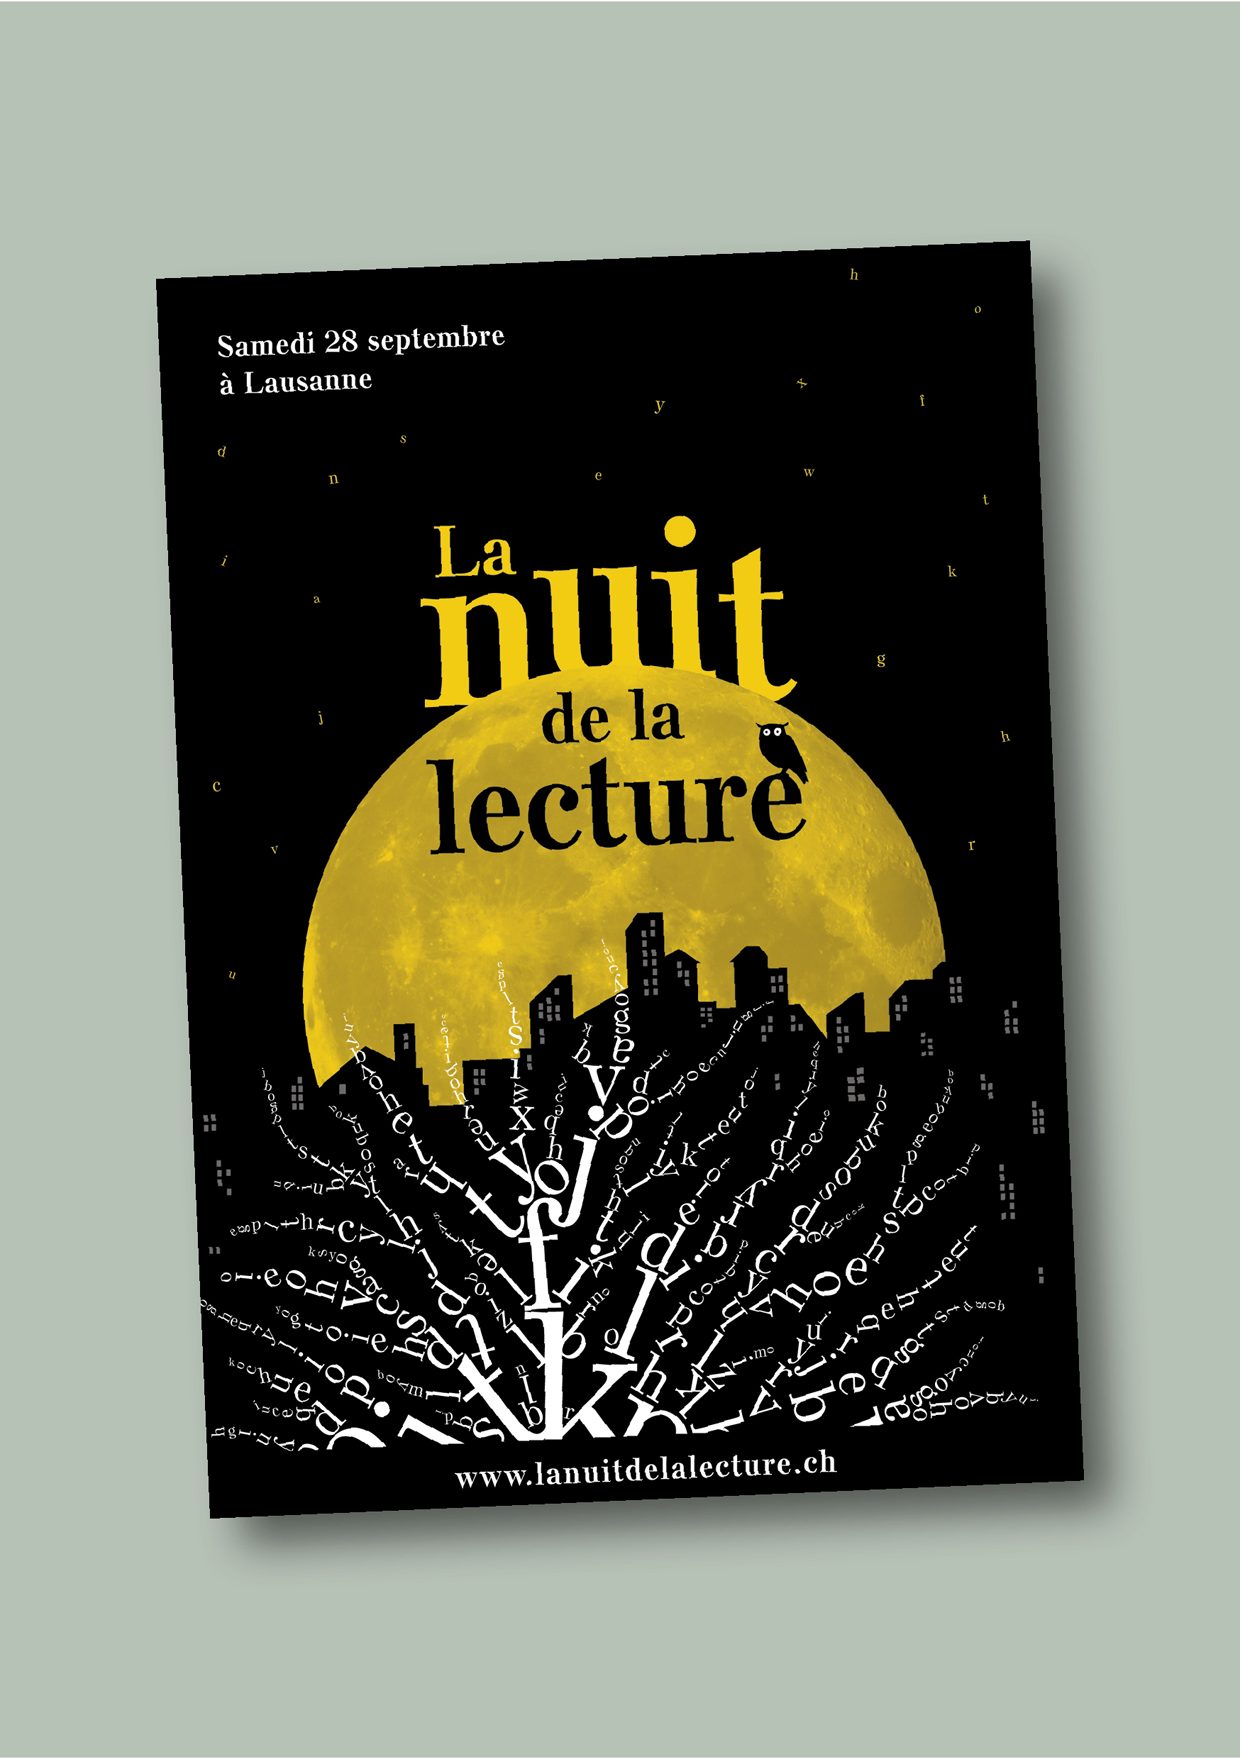 Flyers_1_NuitDeLaLecture